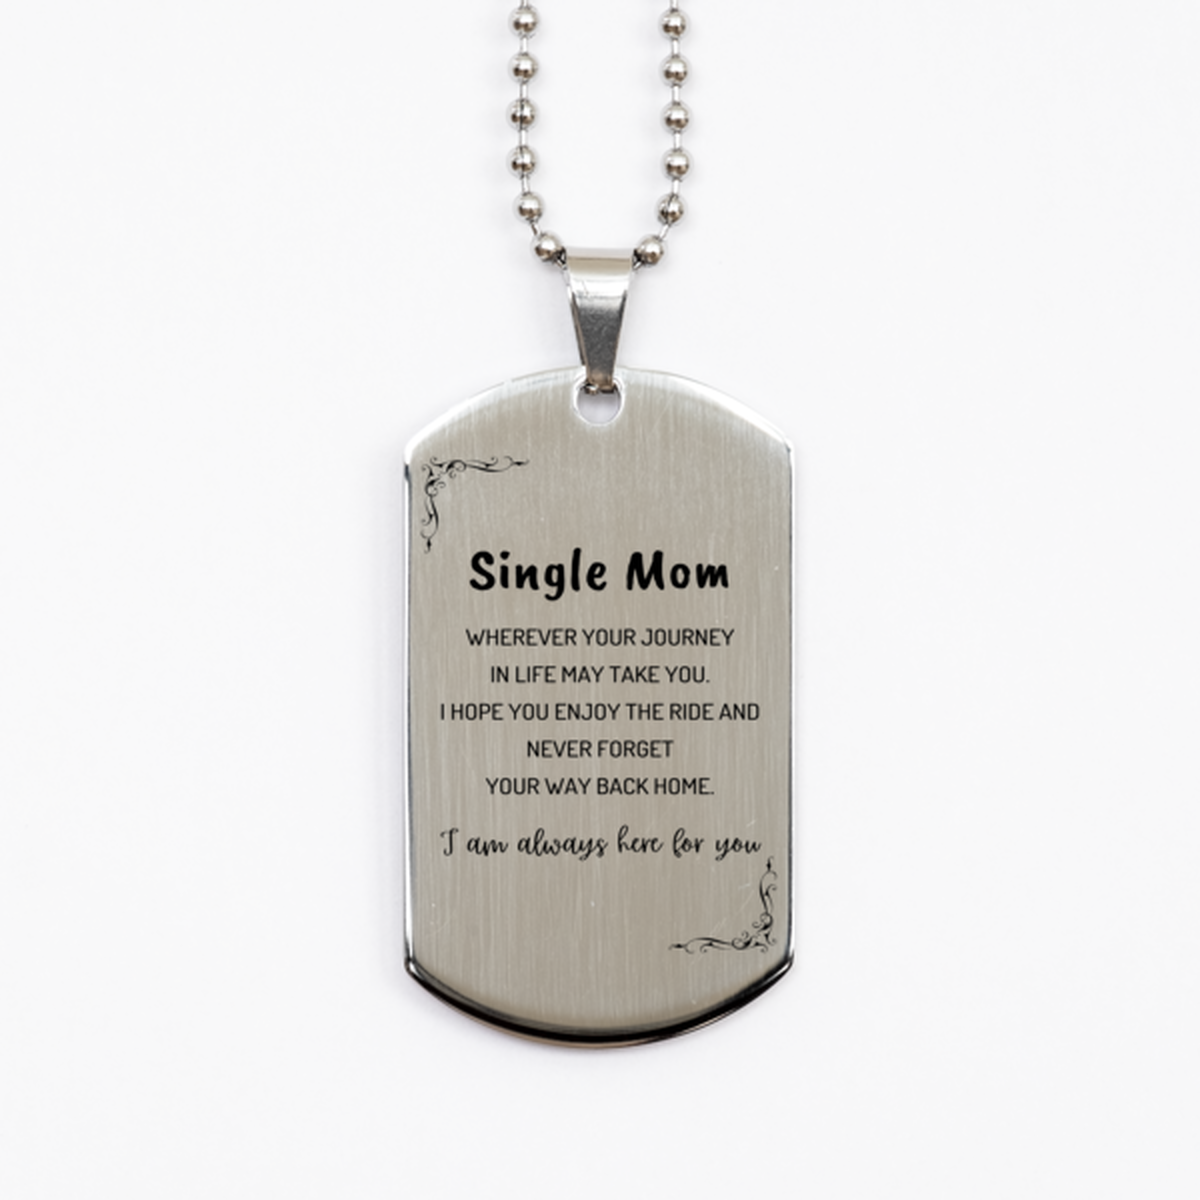 Single Mom wherever your journey in life may take you, I am always here for you Single Mom Silver Dog Tag, Awesome Christmas Gifts For Single Mom, Single Mom Birthday Gifts for Men Women Family Loved One